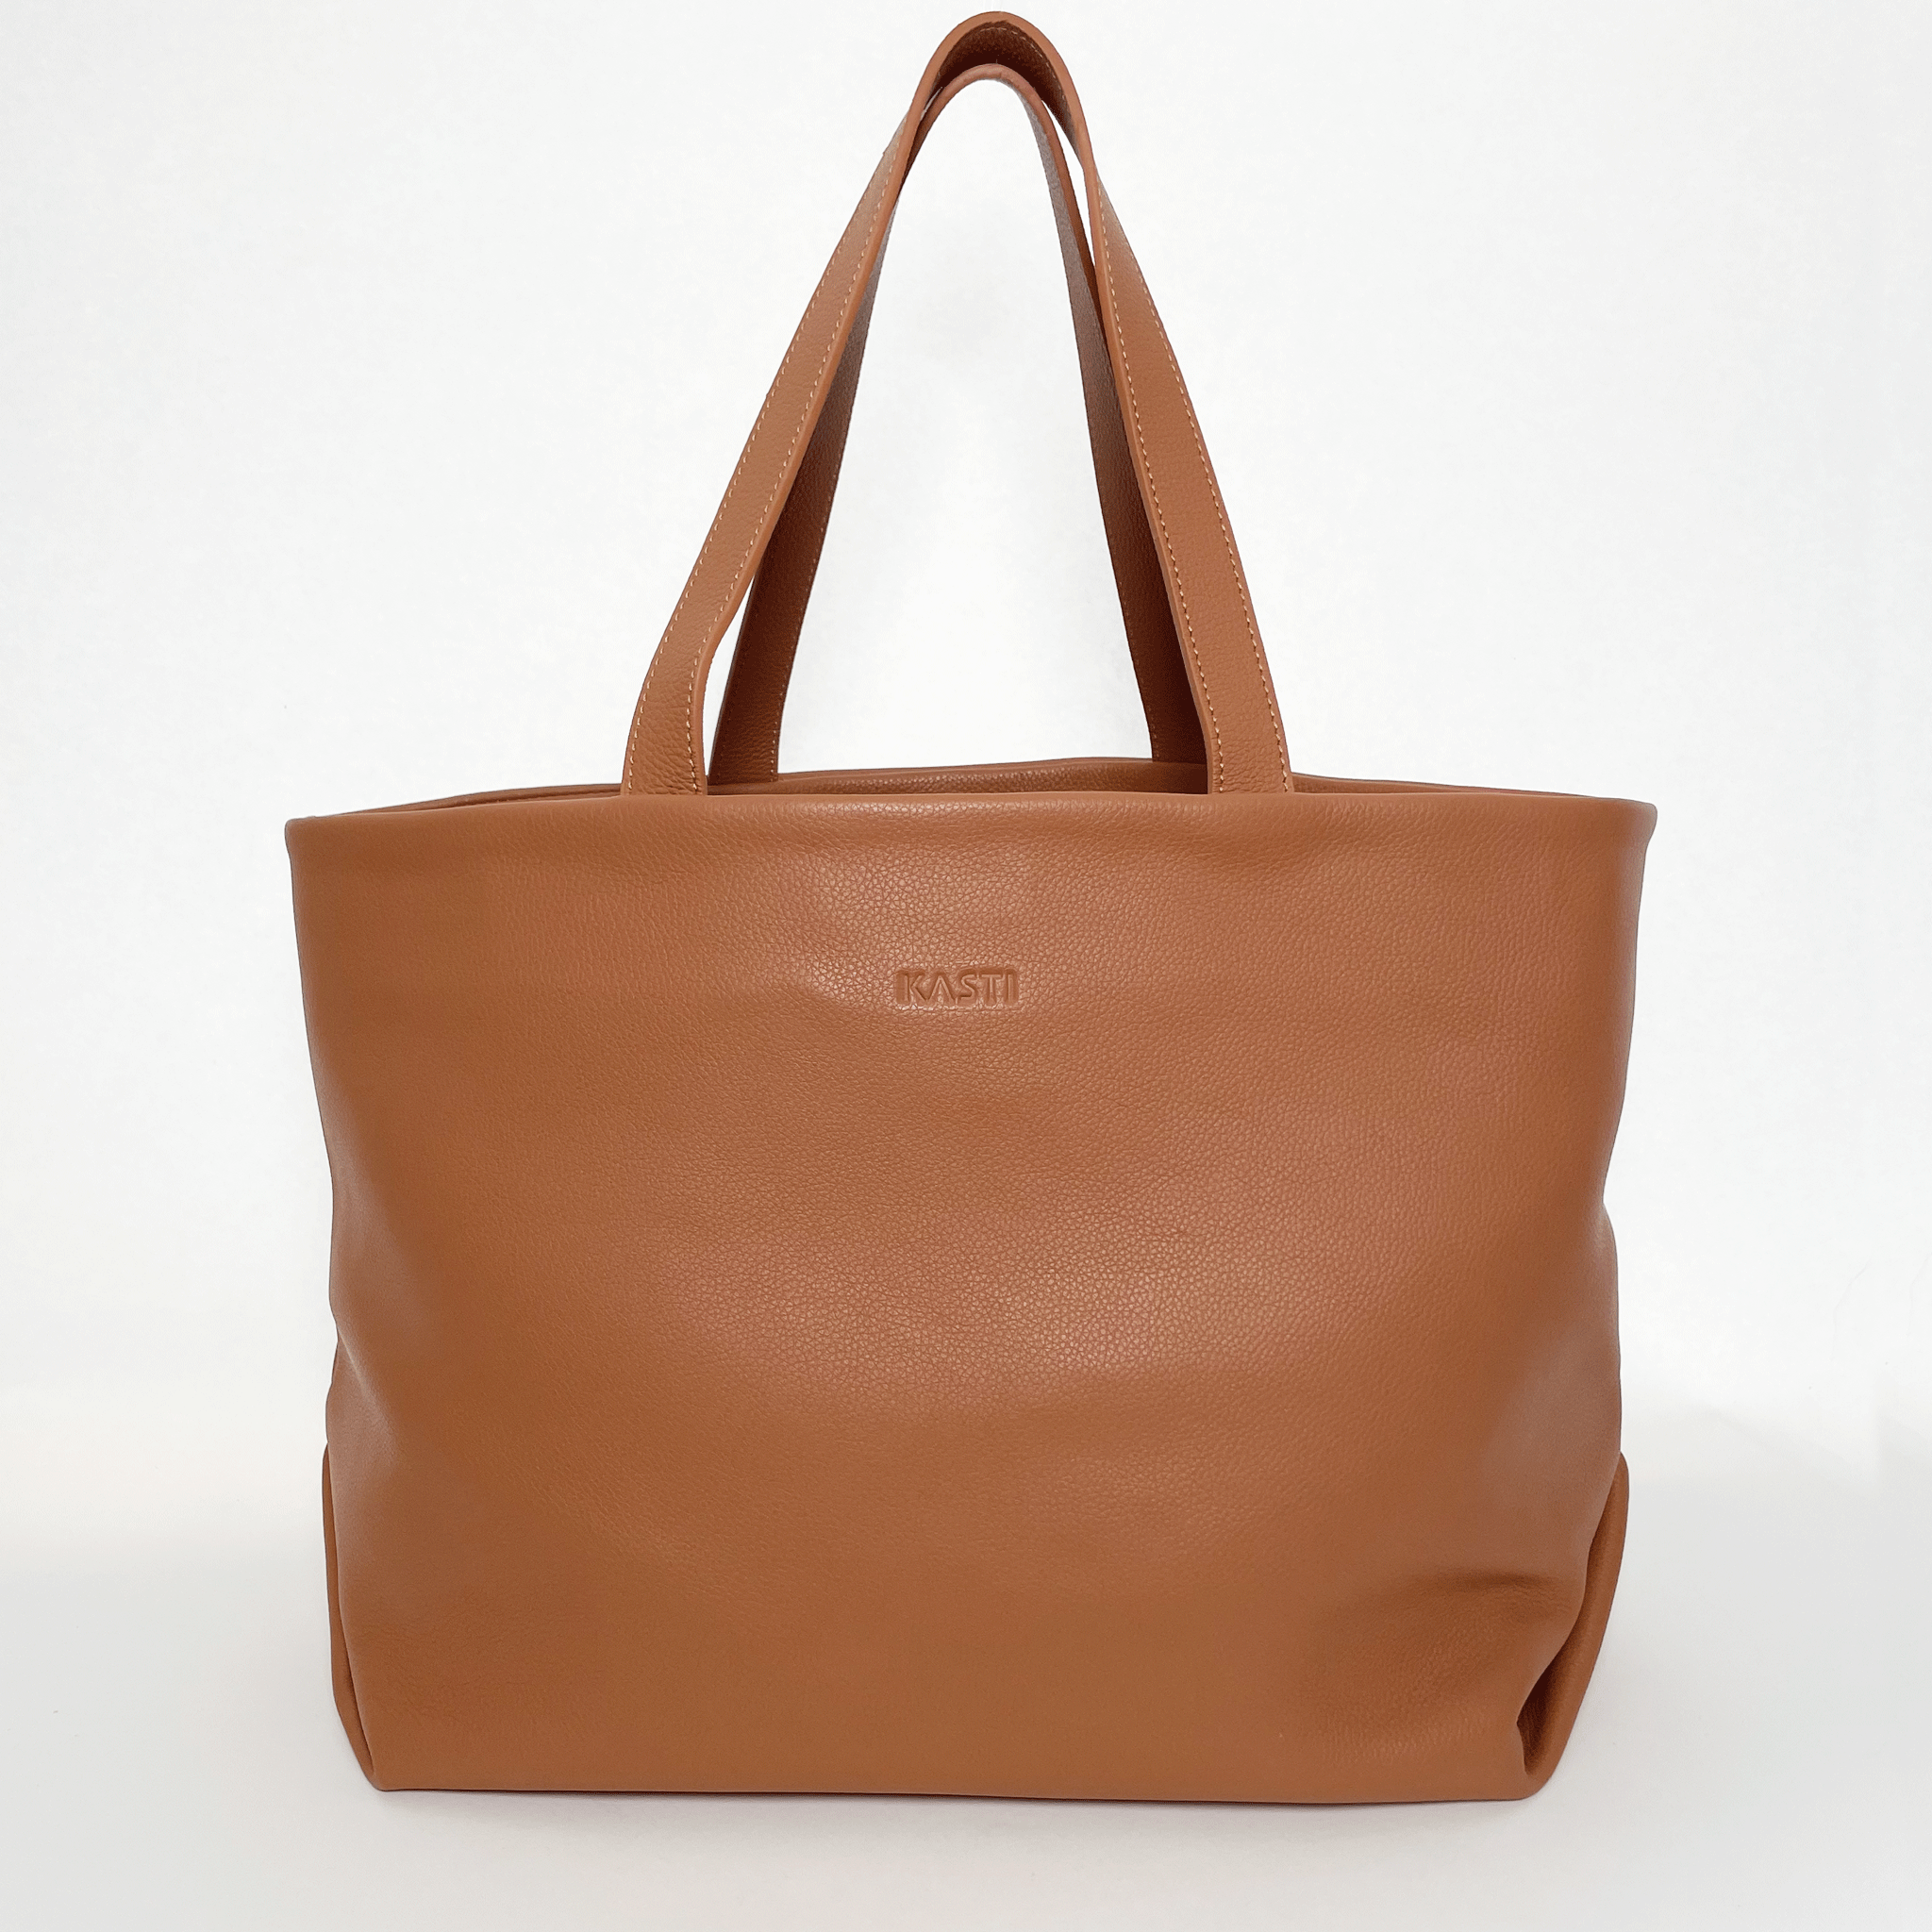 TOTE BUCKET LARGE - GRAIN LEATHER ALMOND